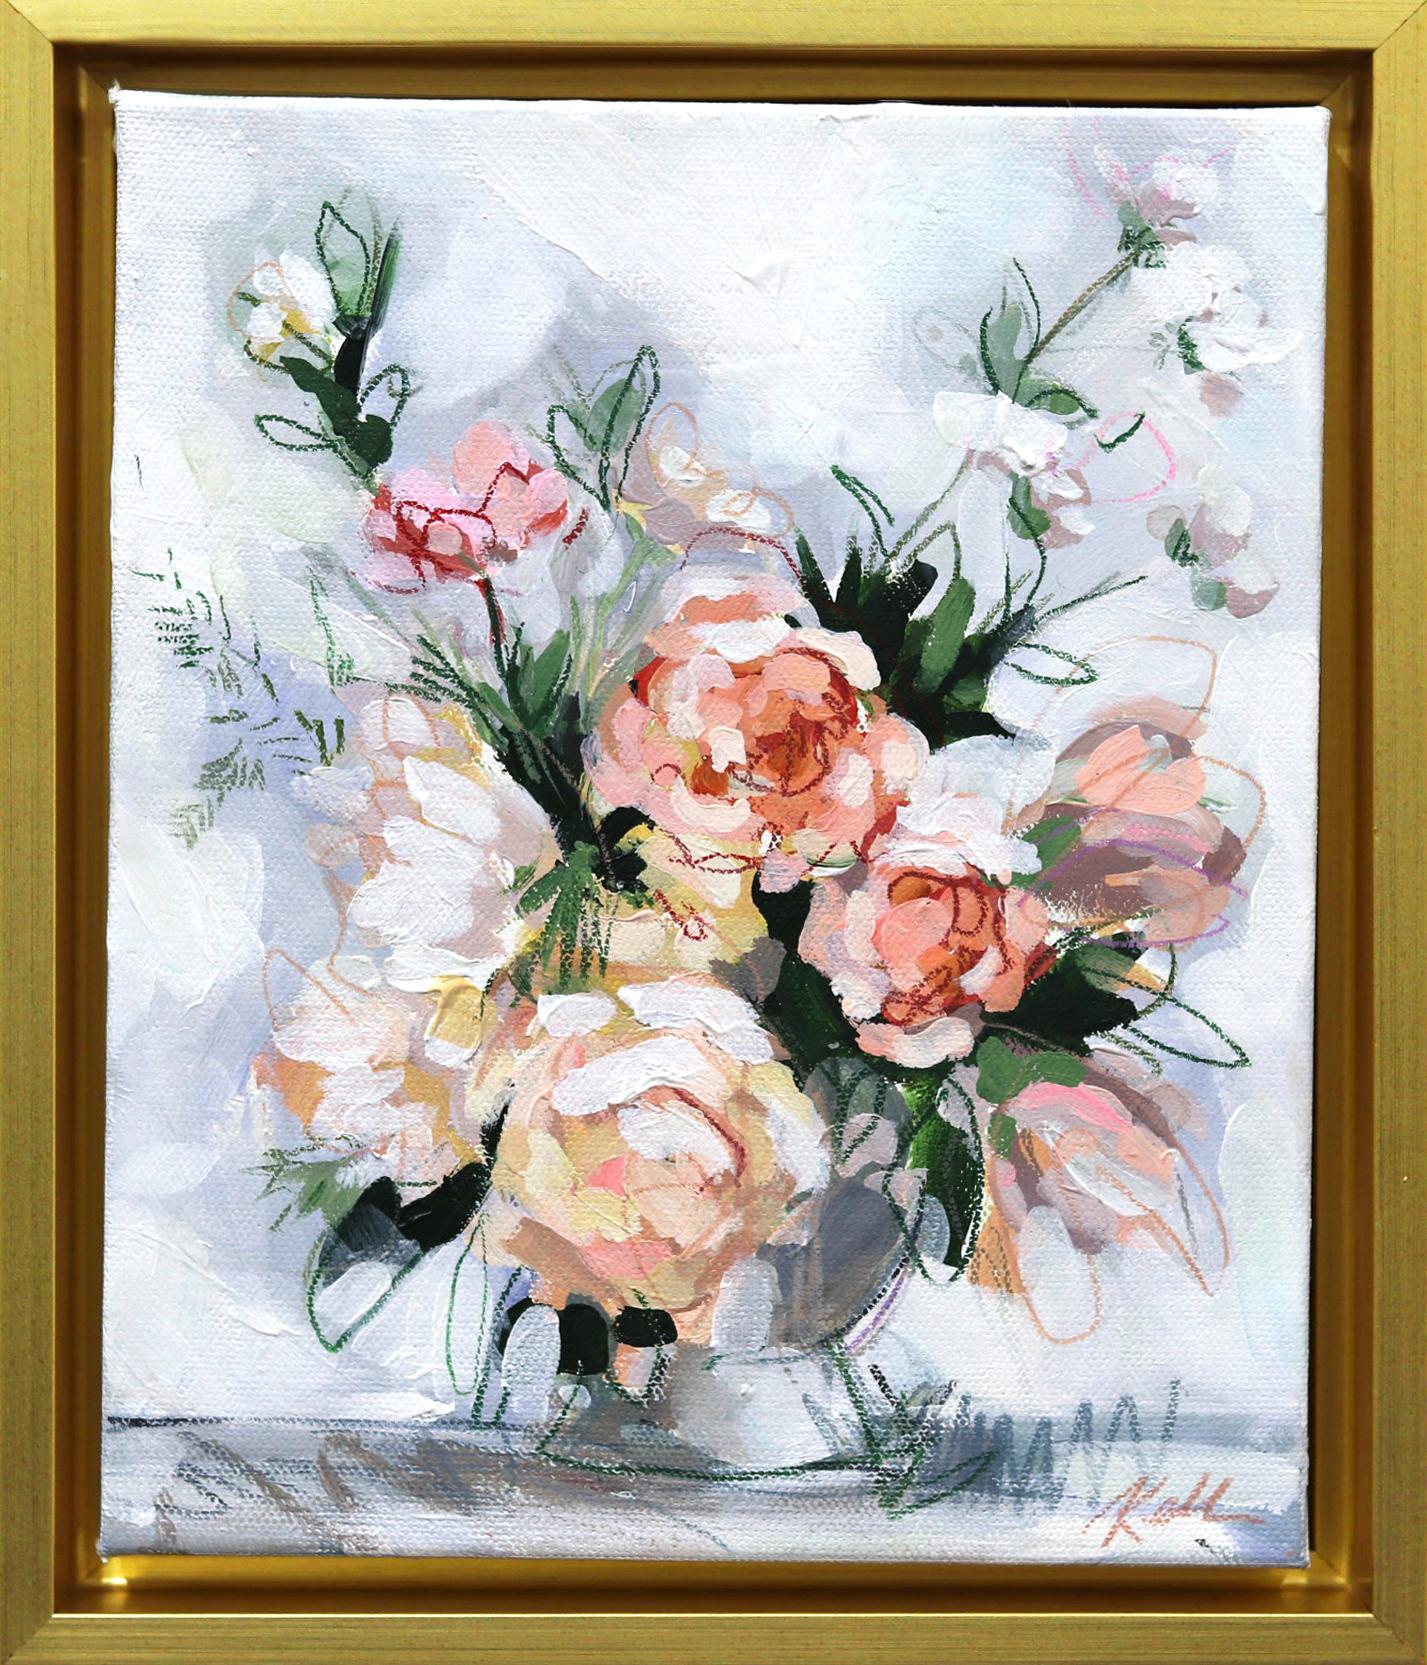 Kellie Newsome Figurative Painting - Elegance Blooms  - Original Framed Floral Painting on Canvas